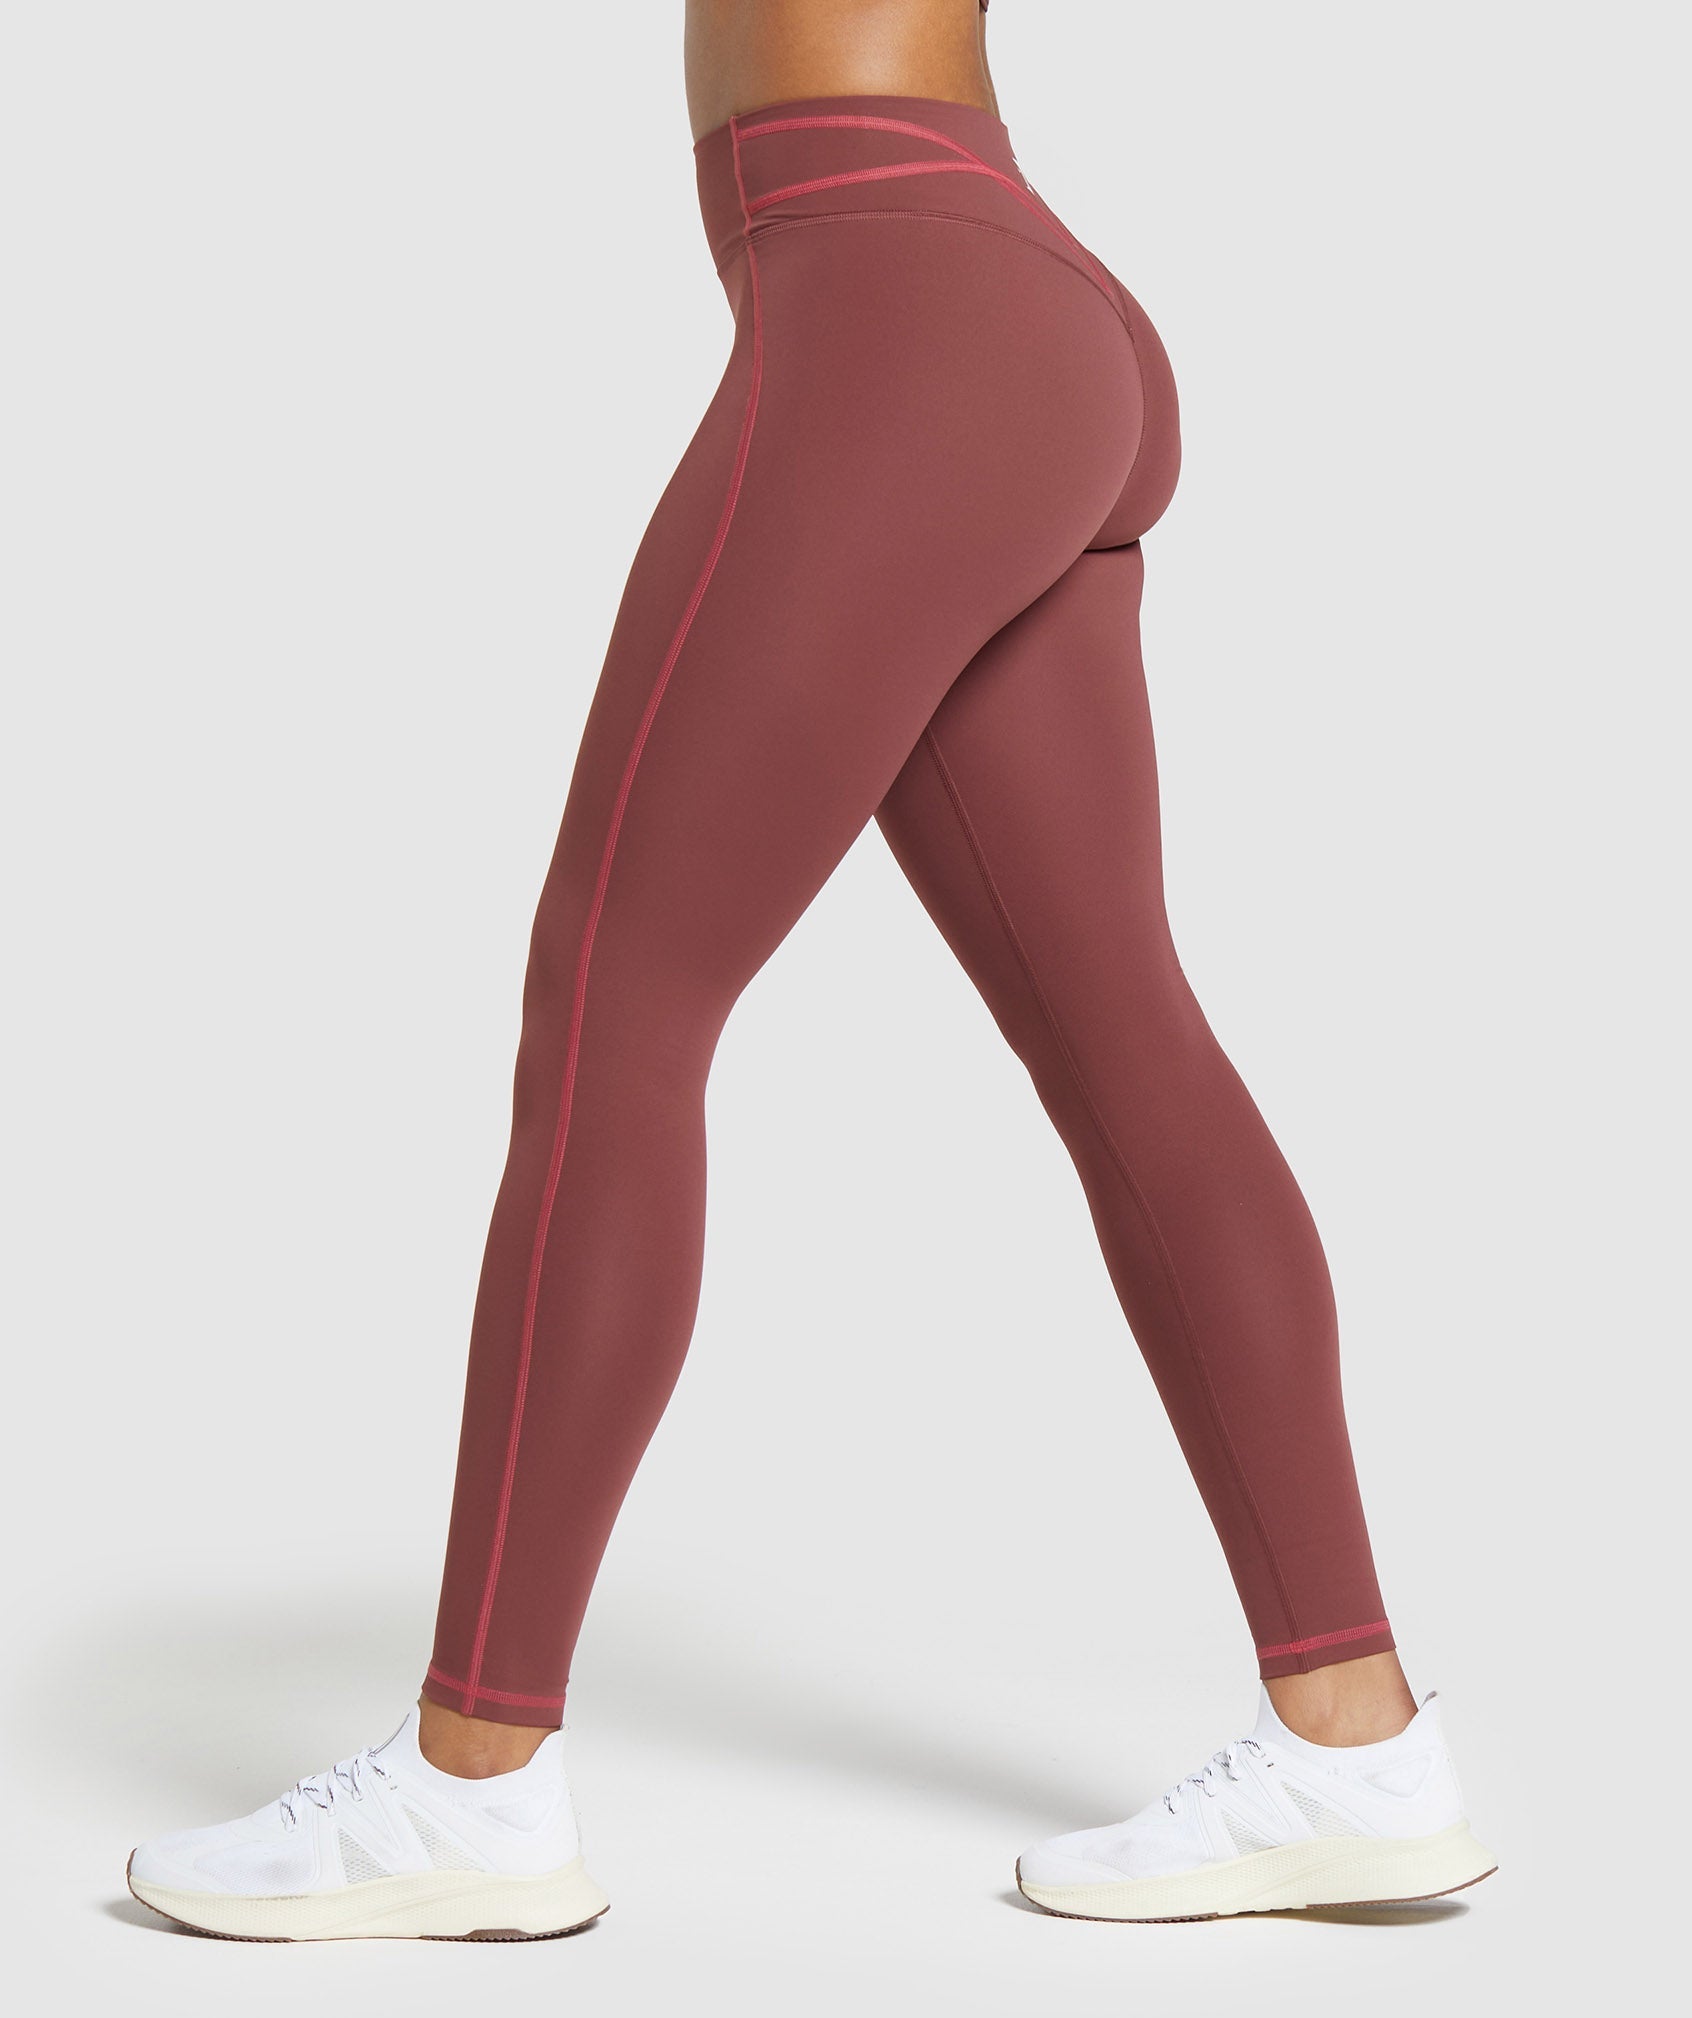 Stitch Feature Leggings in Burgundy Brown - view 3